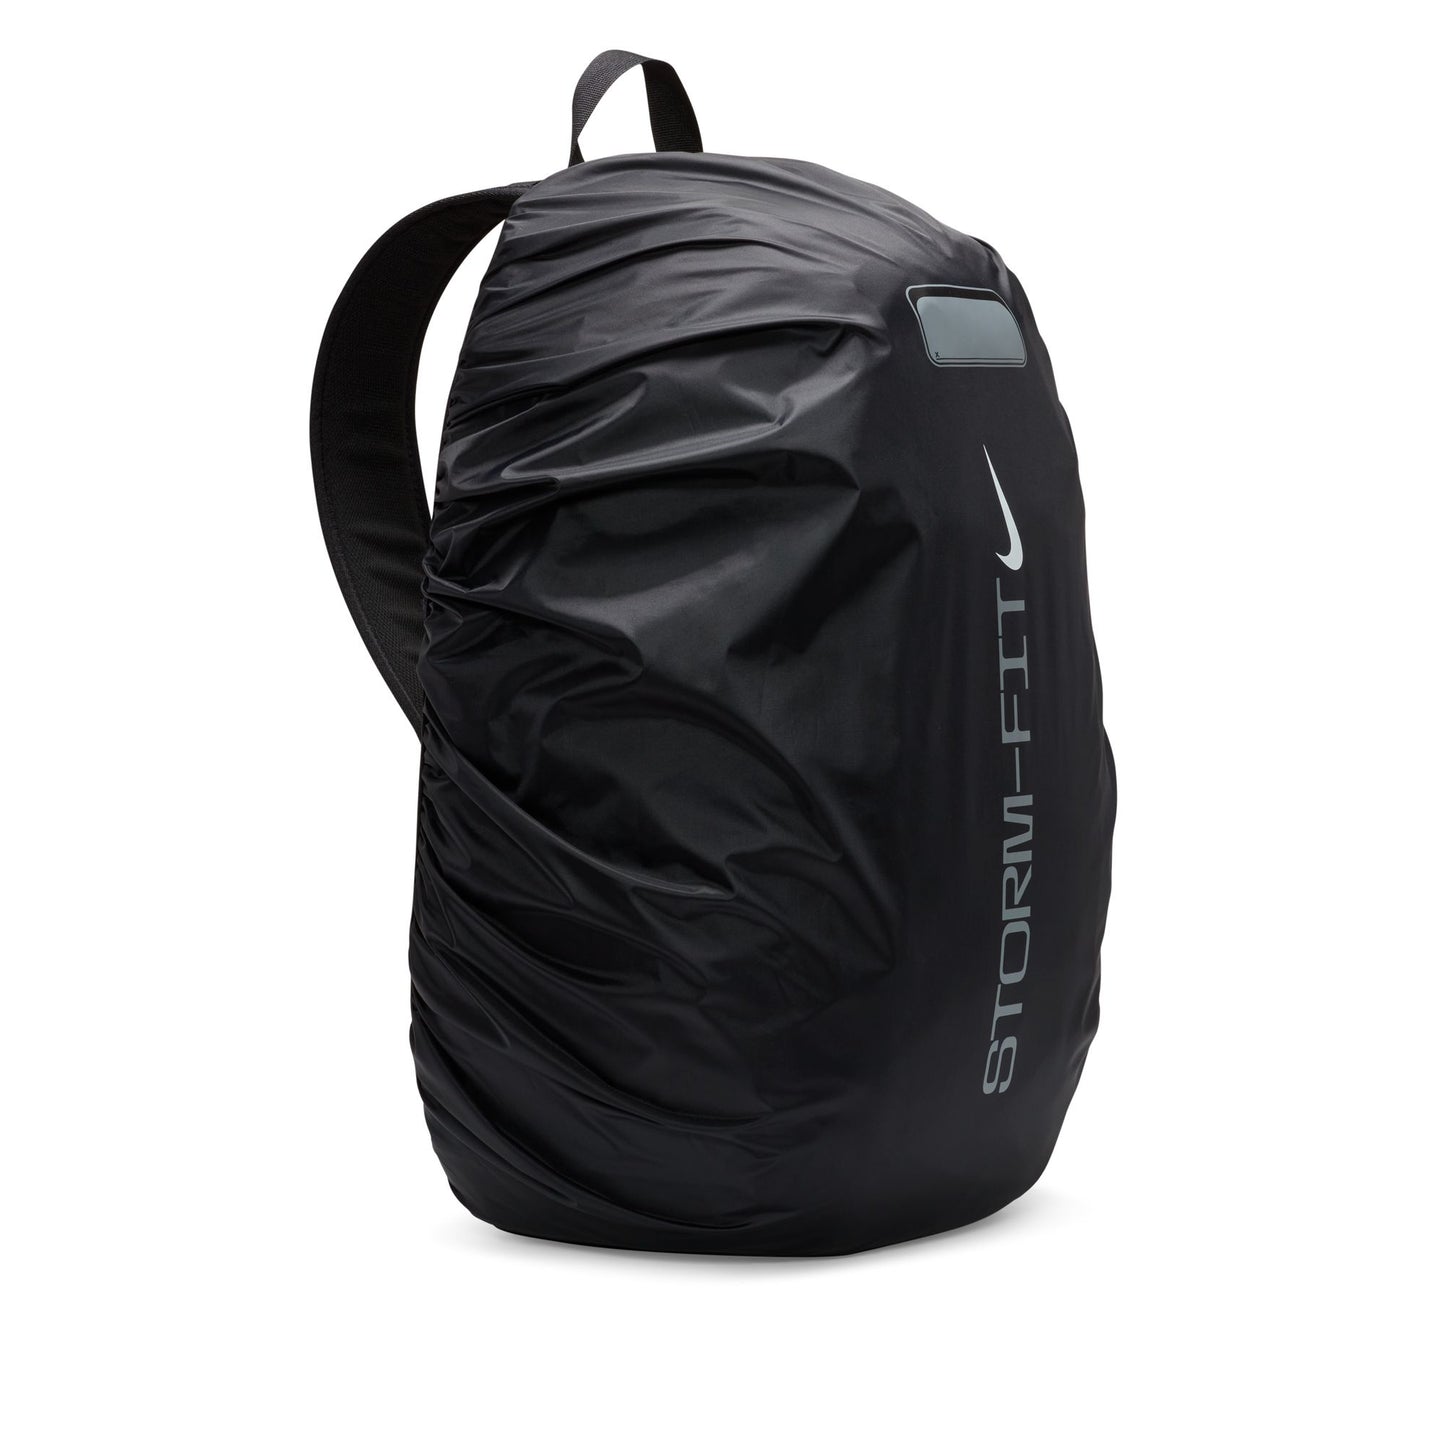 PICTON FC TEAM BACKPACK